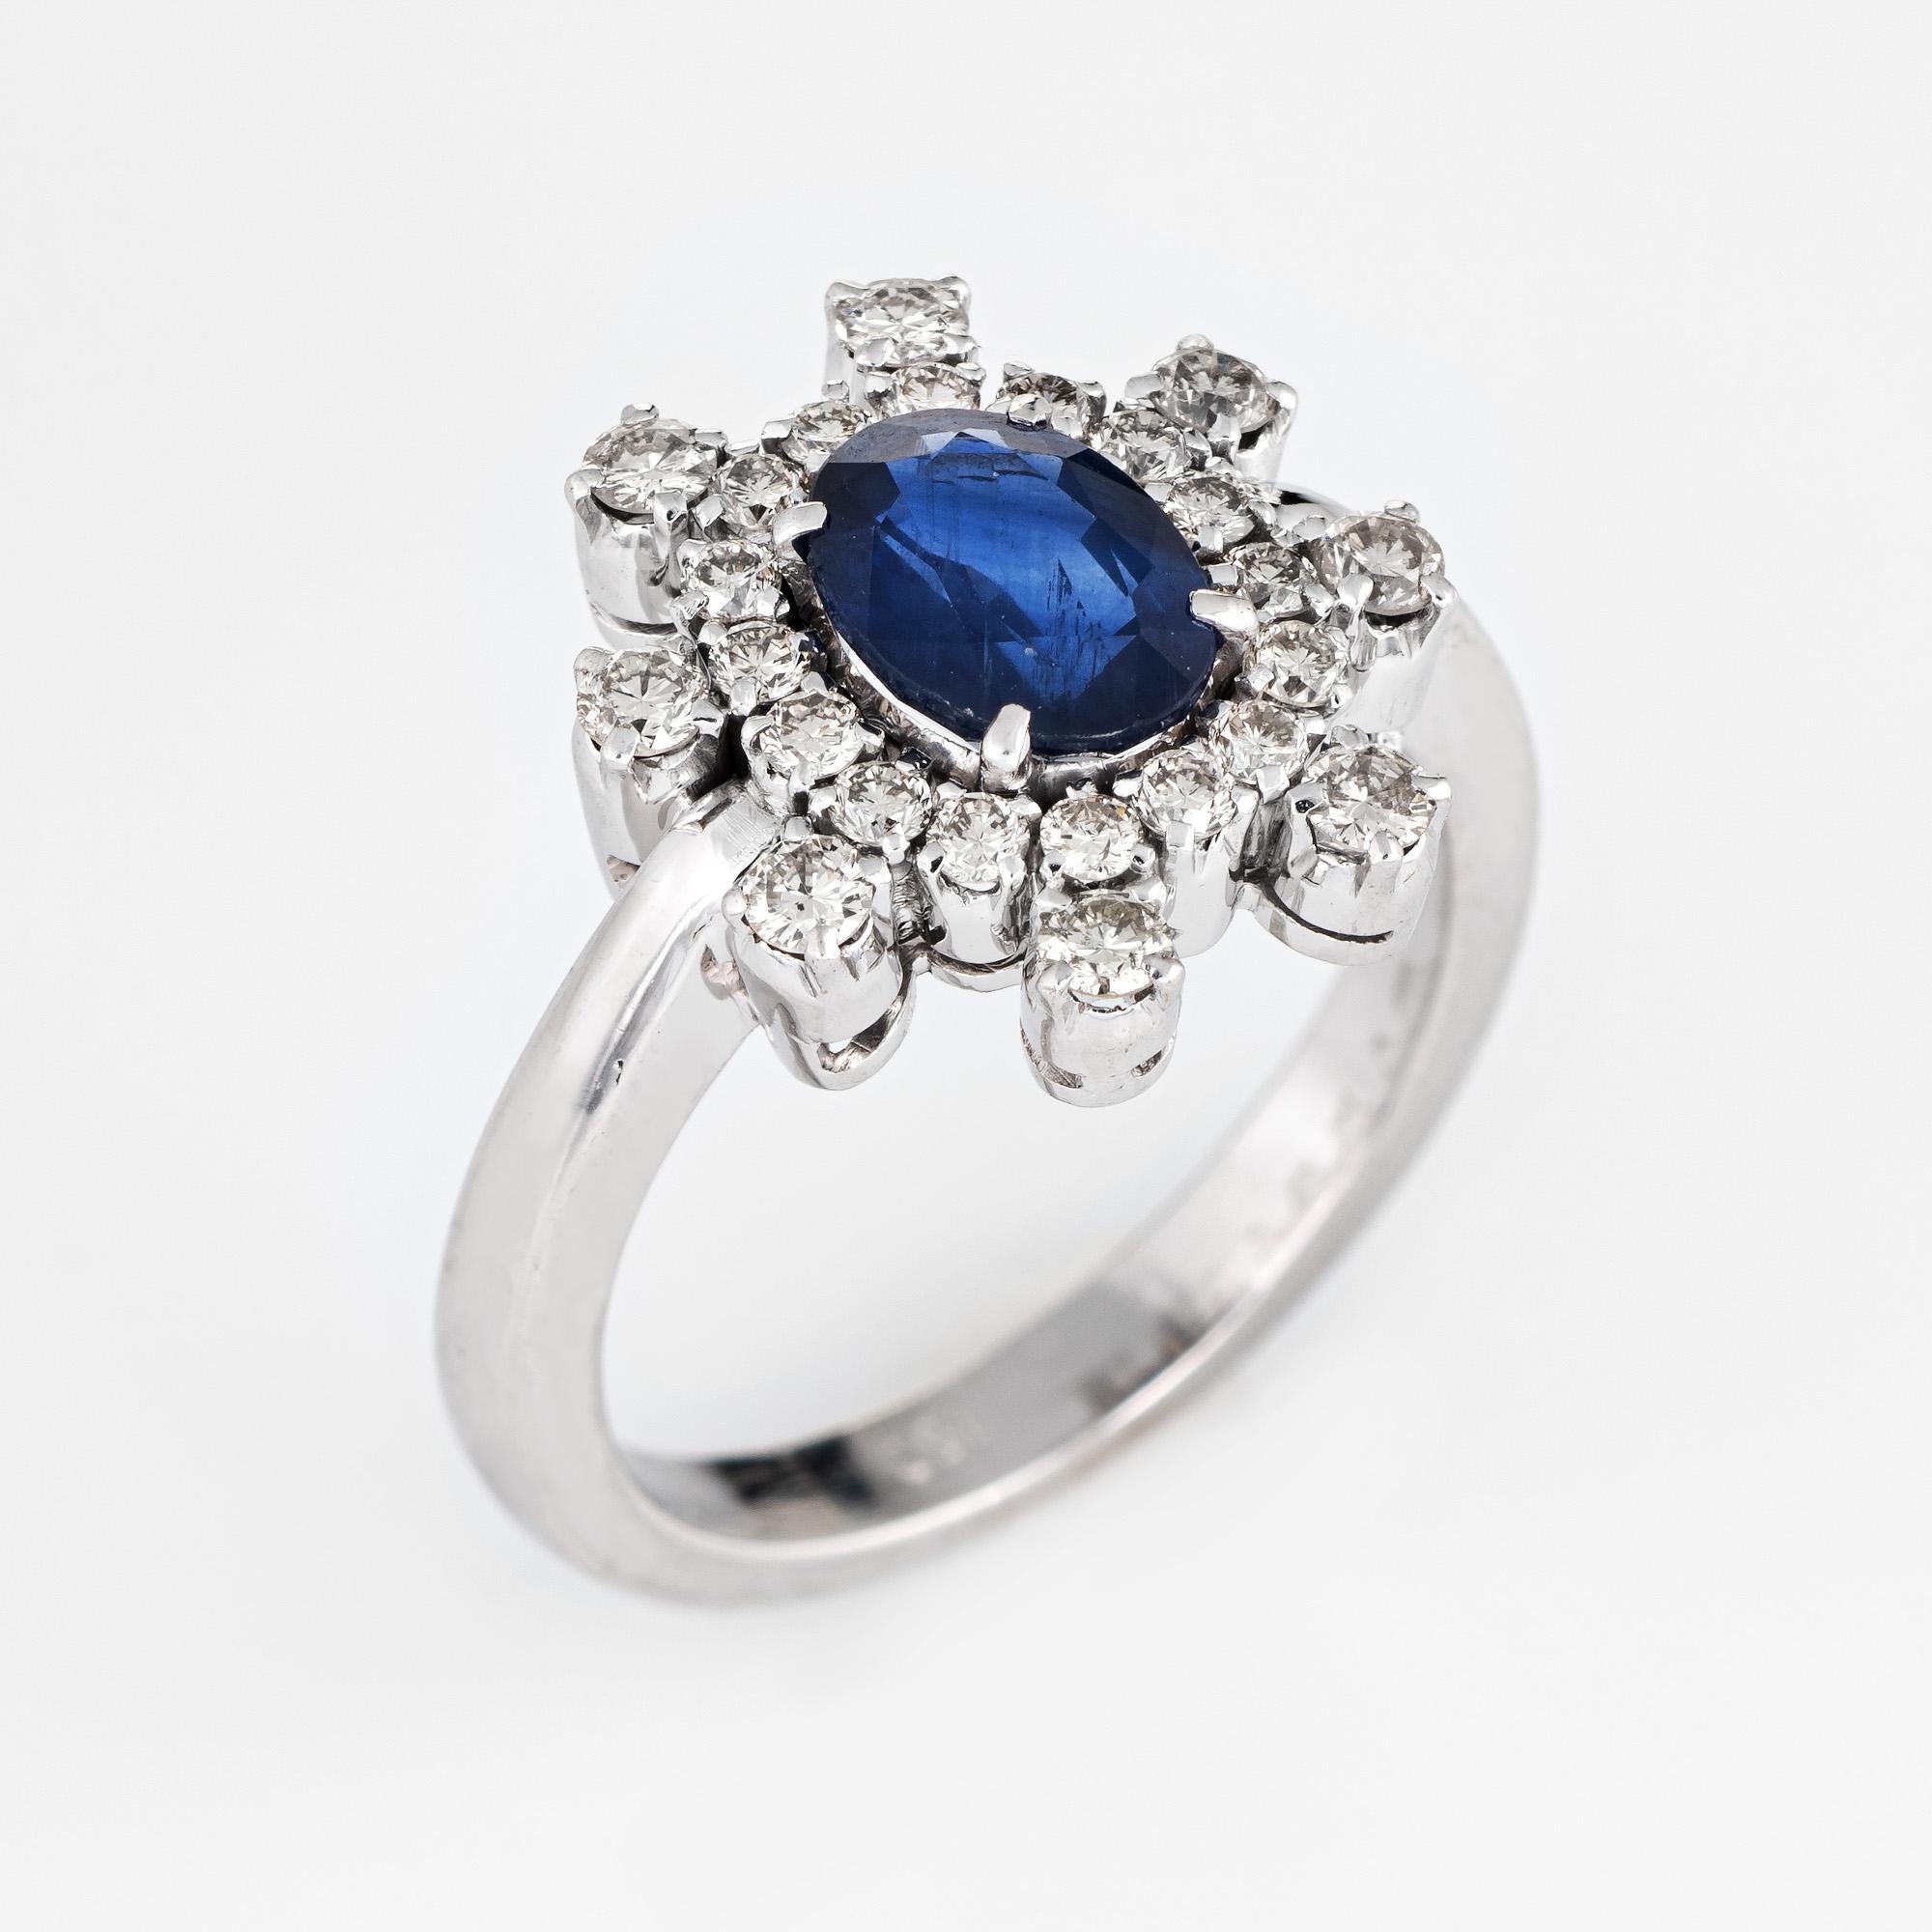 Stylish vintage diamond & sapphire cocktail ring (circa 1970s to 1980s) crafted in 18 karat white gold. 

Faceted oval sapphire measures 8mm x 6mm (estimated at 1.75 carats), accented with an estimated 0.64 carats of diamonds (estimated at I-J color